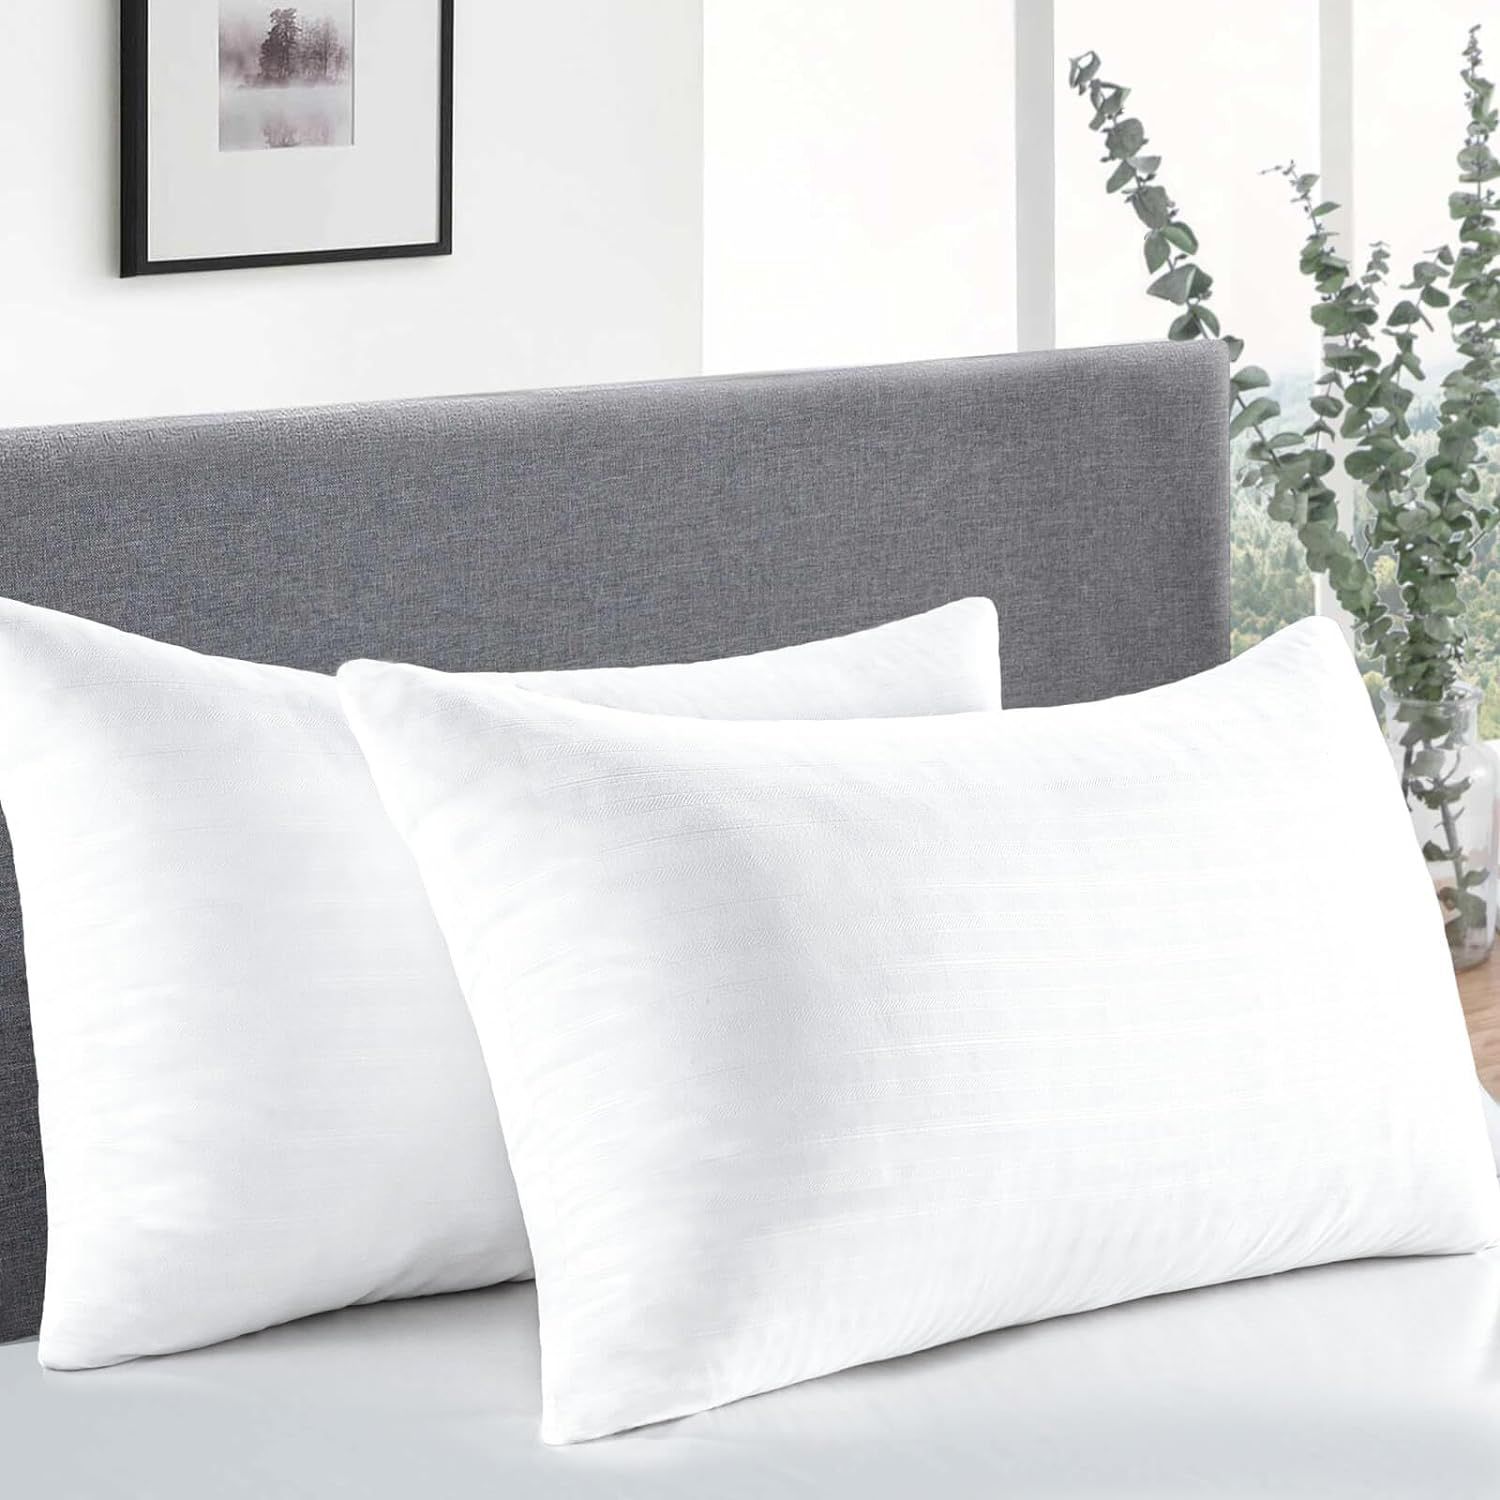 2 Standard Size Pillows - Down Alternative for Back, Stomach & Side Sleepers 26"L x 26"W